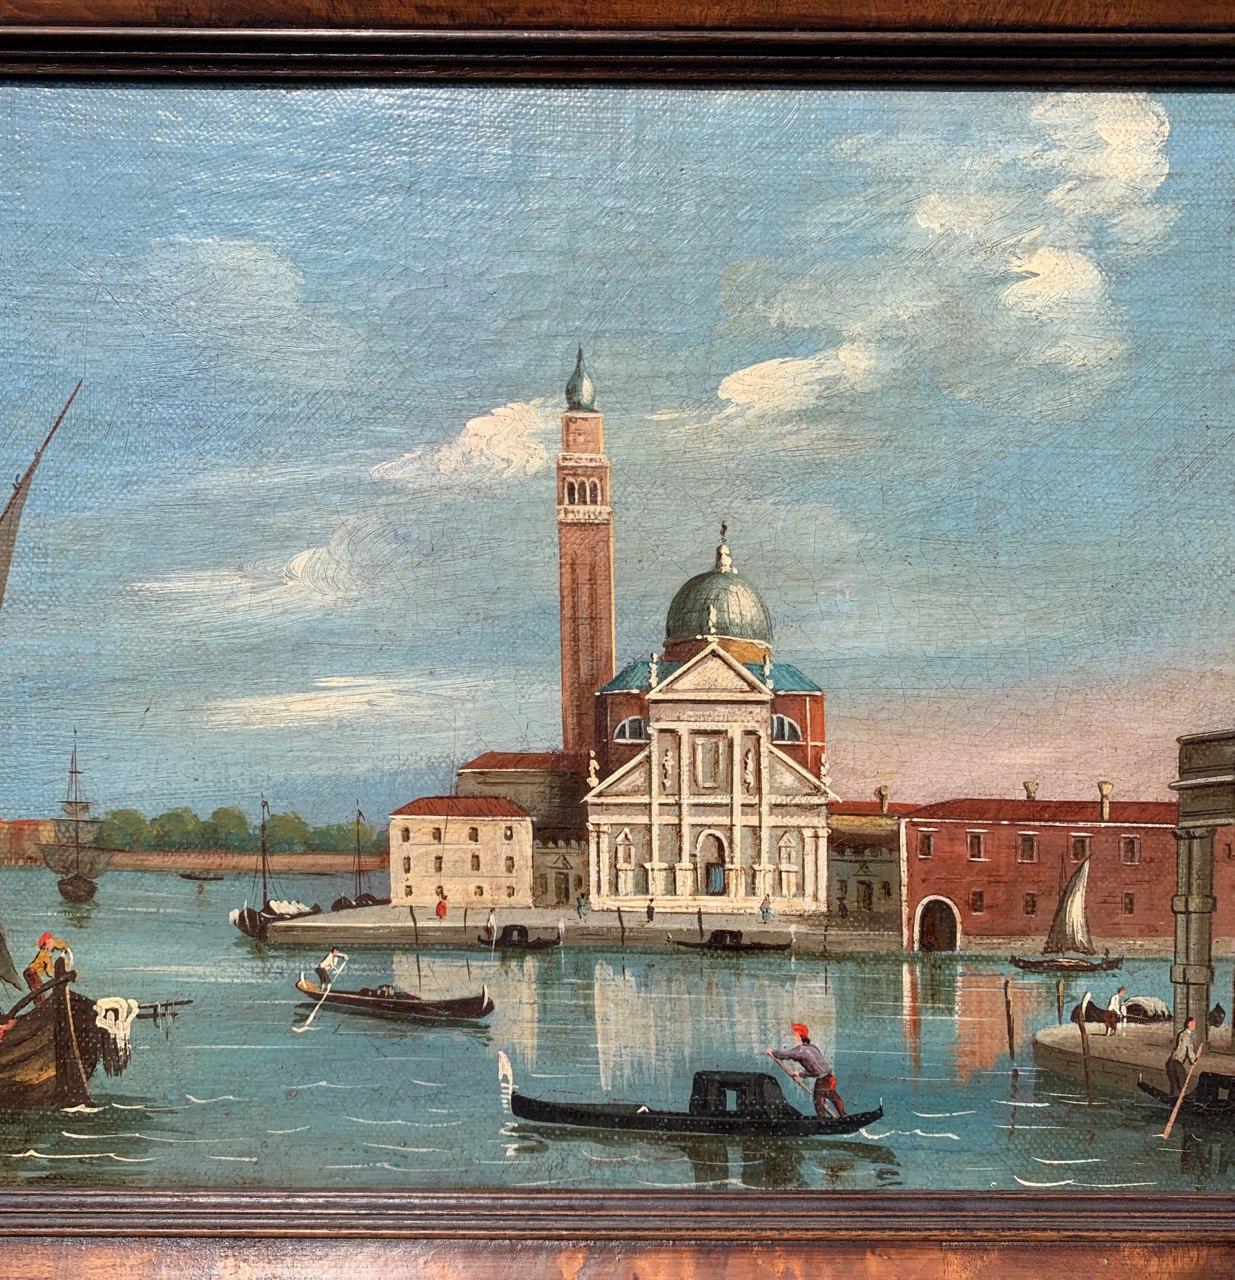 Venetian vedutist (Canaletto follower) - Late 19th century painting - Venice - Realist Painting by Giovanni Antonio Canal (Canaletto)